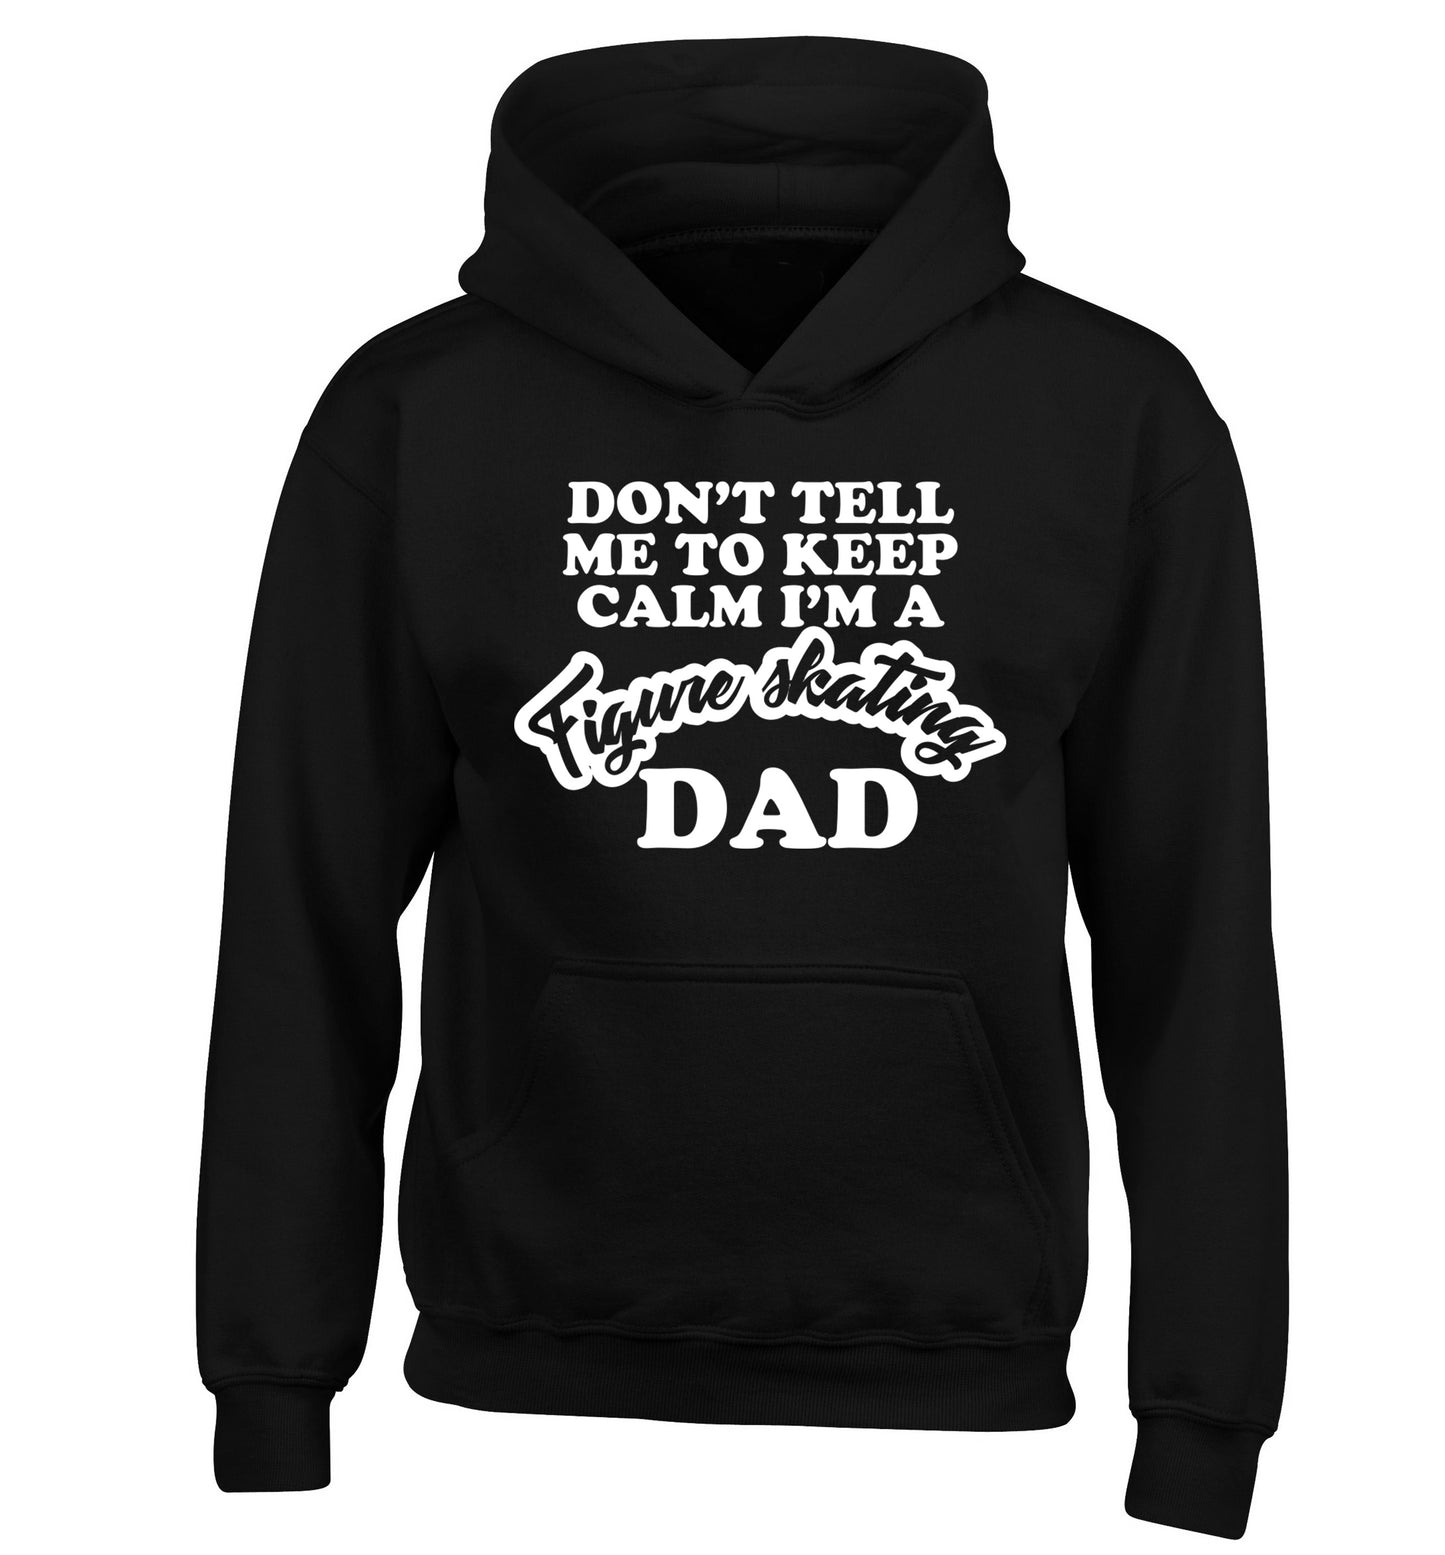 Don't tell me to keep calm I'm a figure skating dad children's black hoodie 12-14 Years